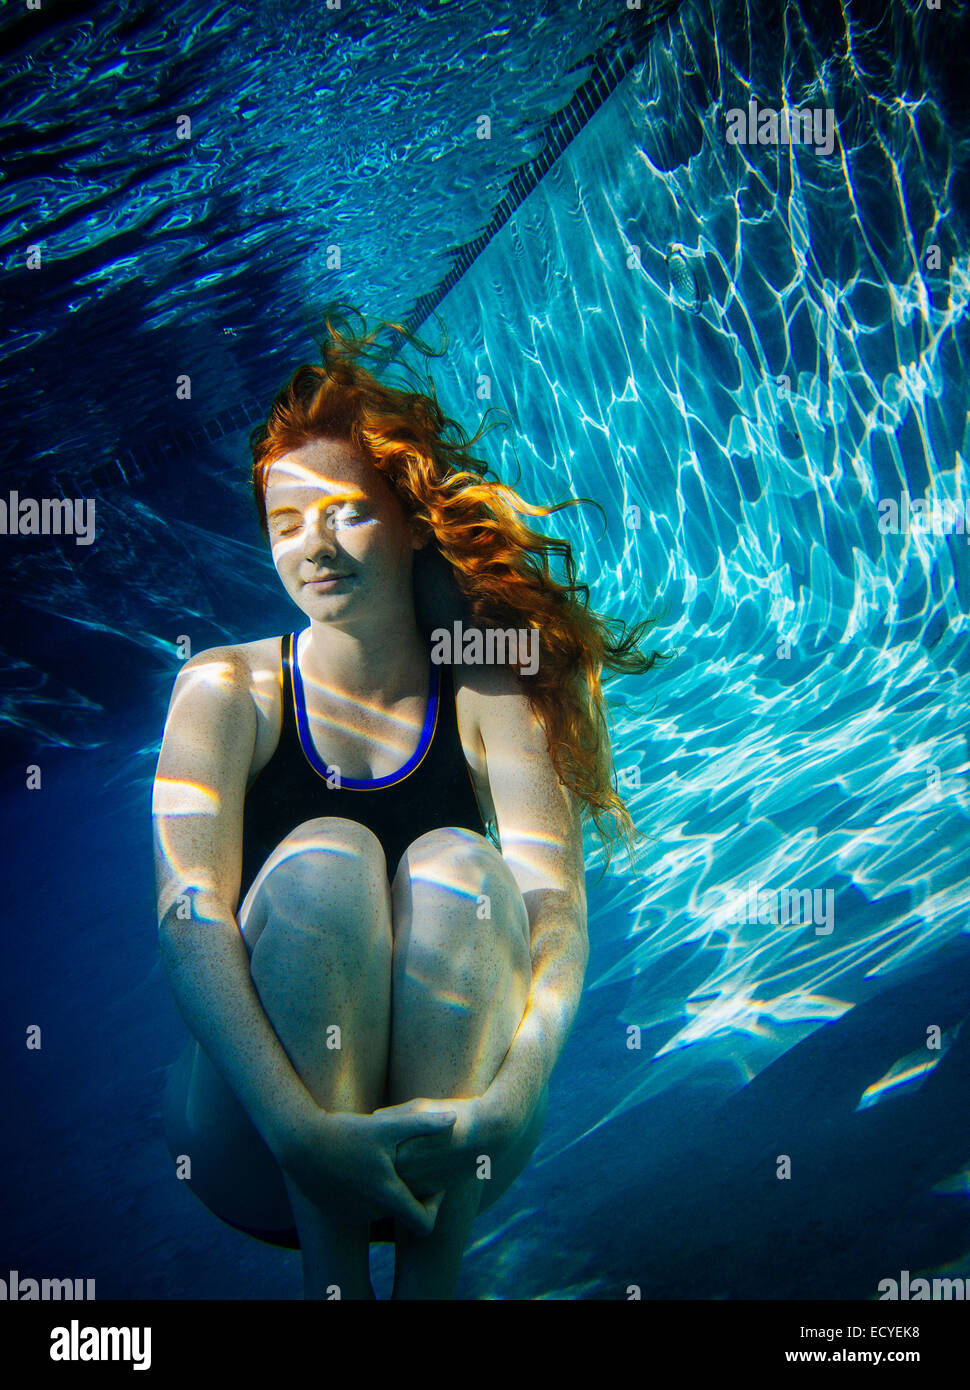 Teenage girl with red hair swimming underwater in pool Stock Photo